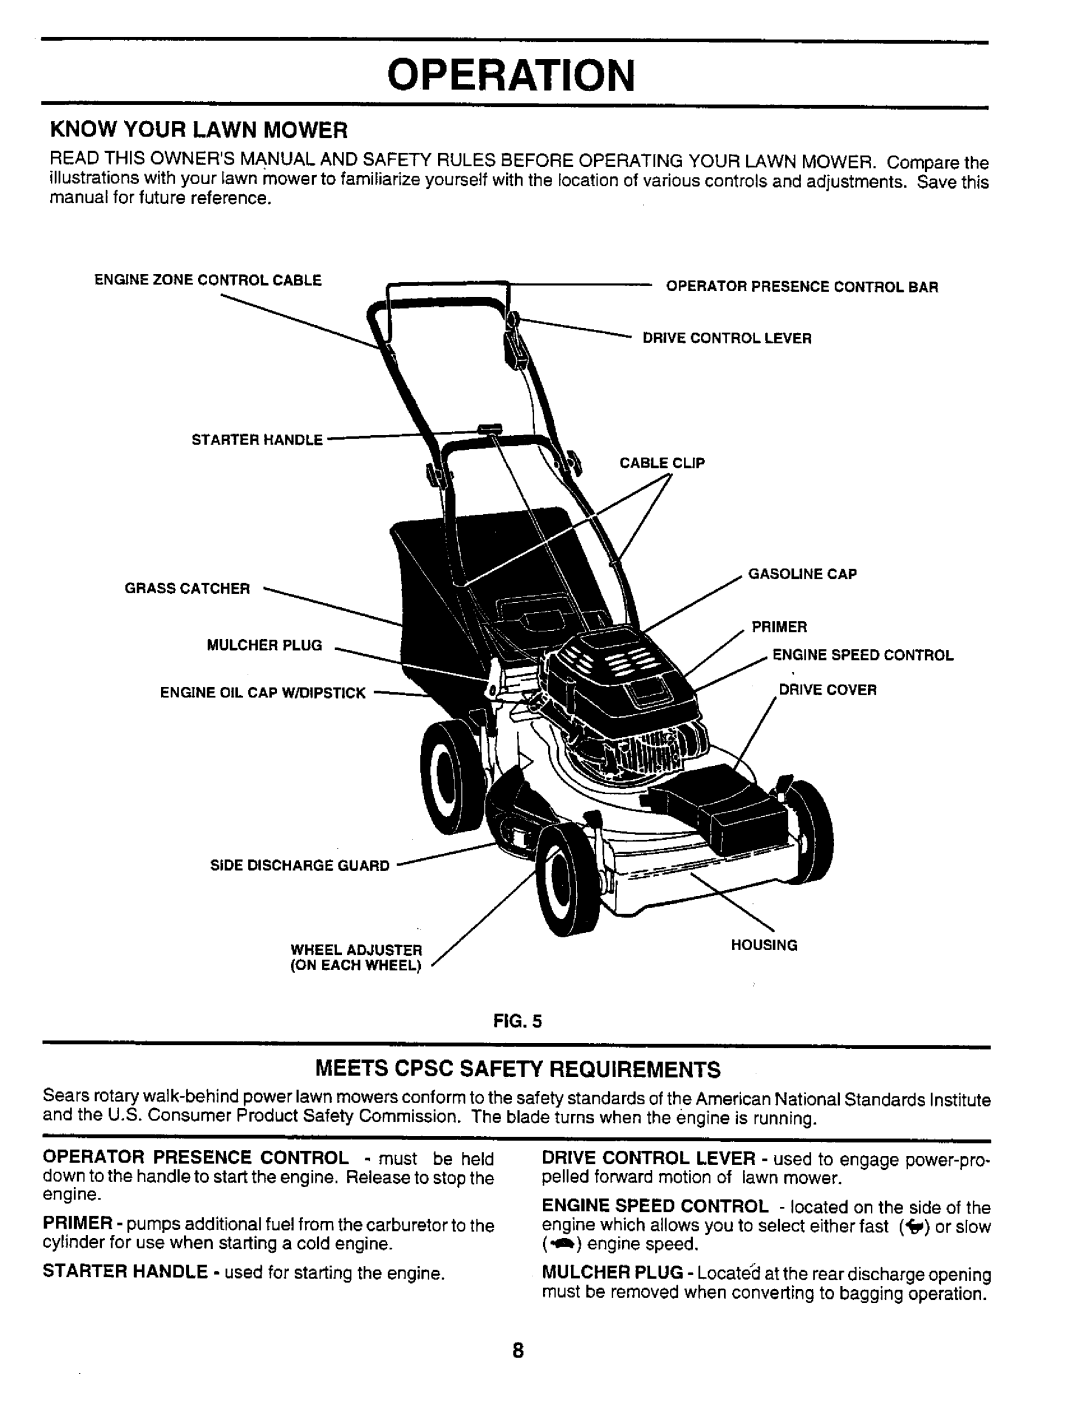 Sears 917.373981 owner manual Operation, Meets Cpsc Safety Requirements, Know Your Lawn Mower 